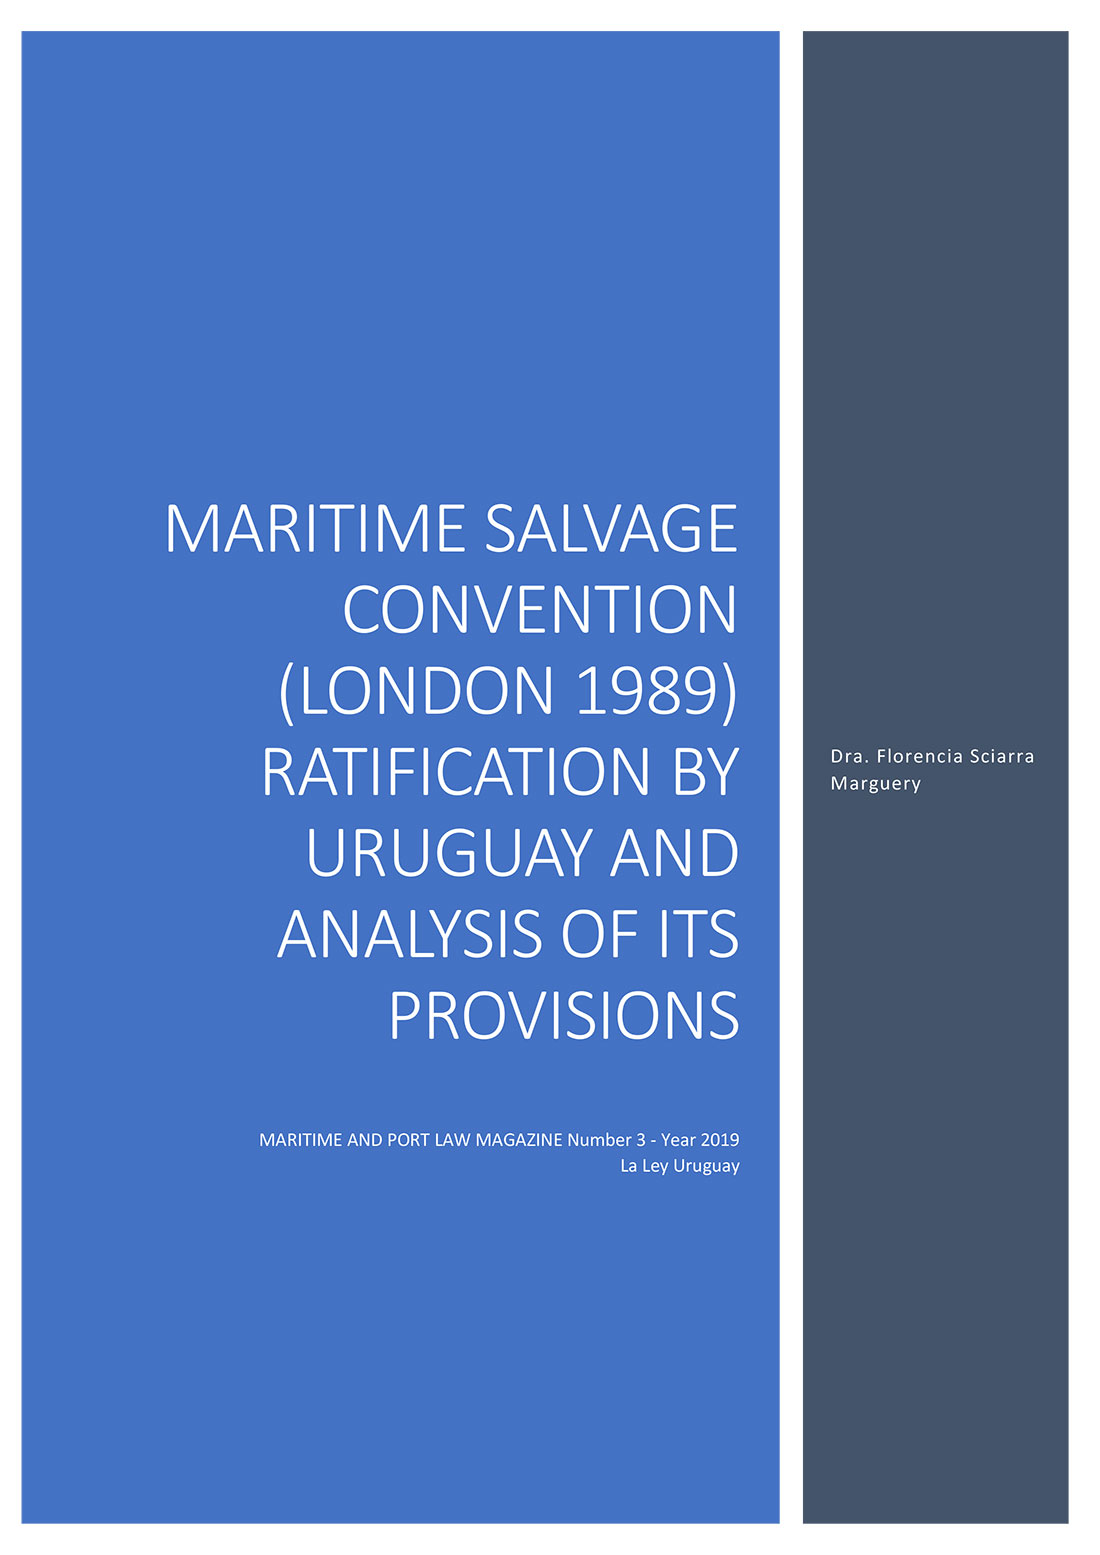 SCIARRA & ASOC maritime salvage convention (london 1989) Its recent ratification by Uruguay and an analysis of its provisions.